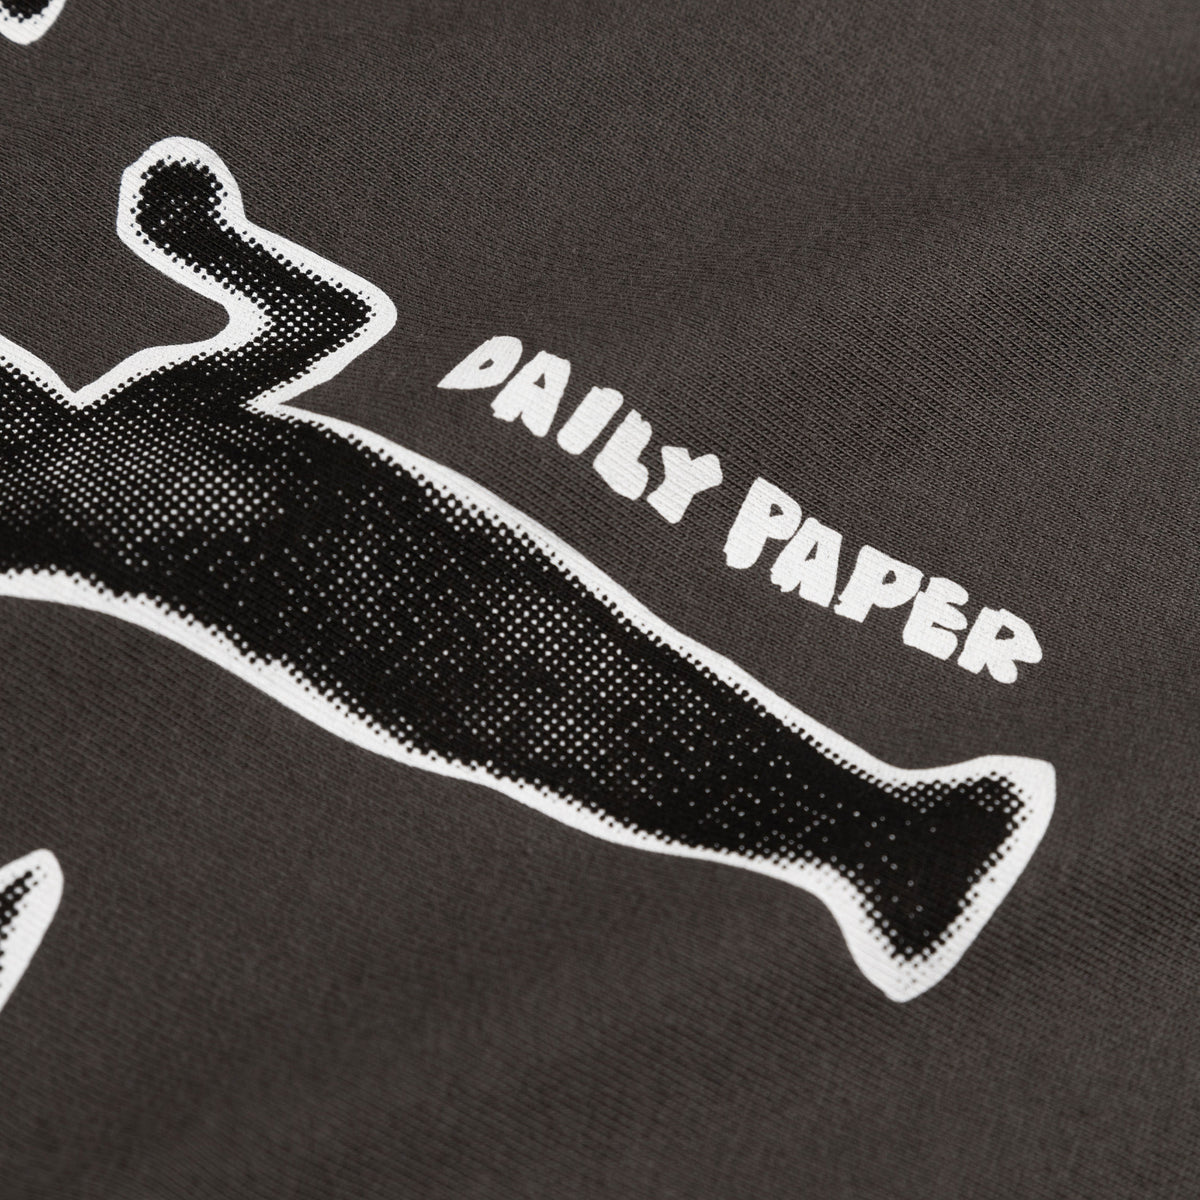 Daily Paper Circle Tee – buy now at Asphaltgold Online Store!